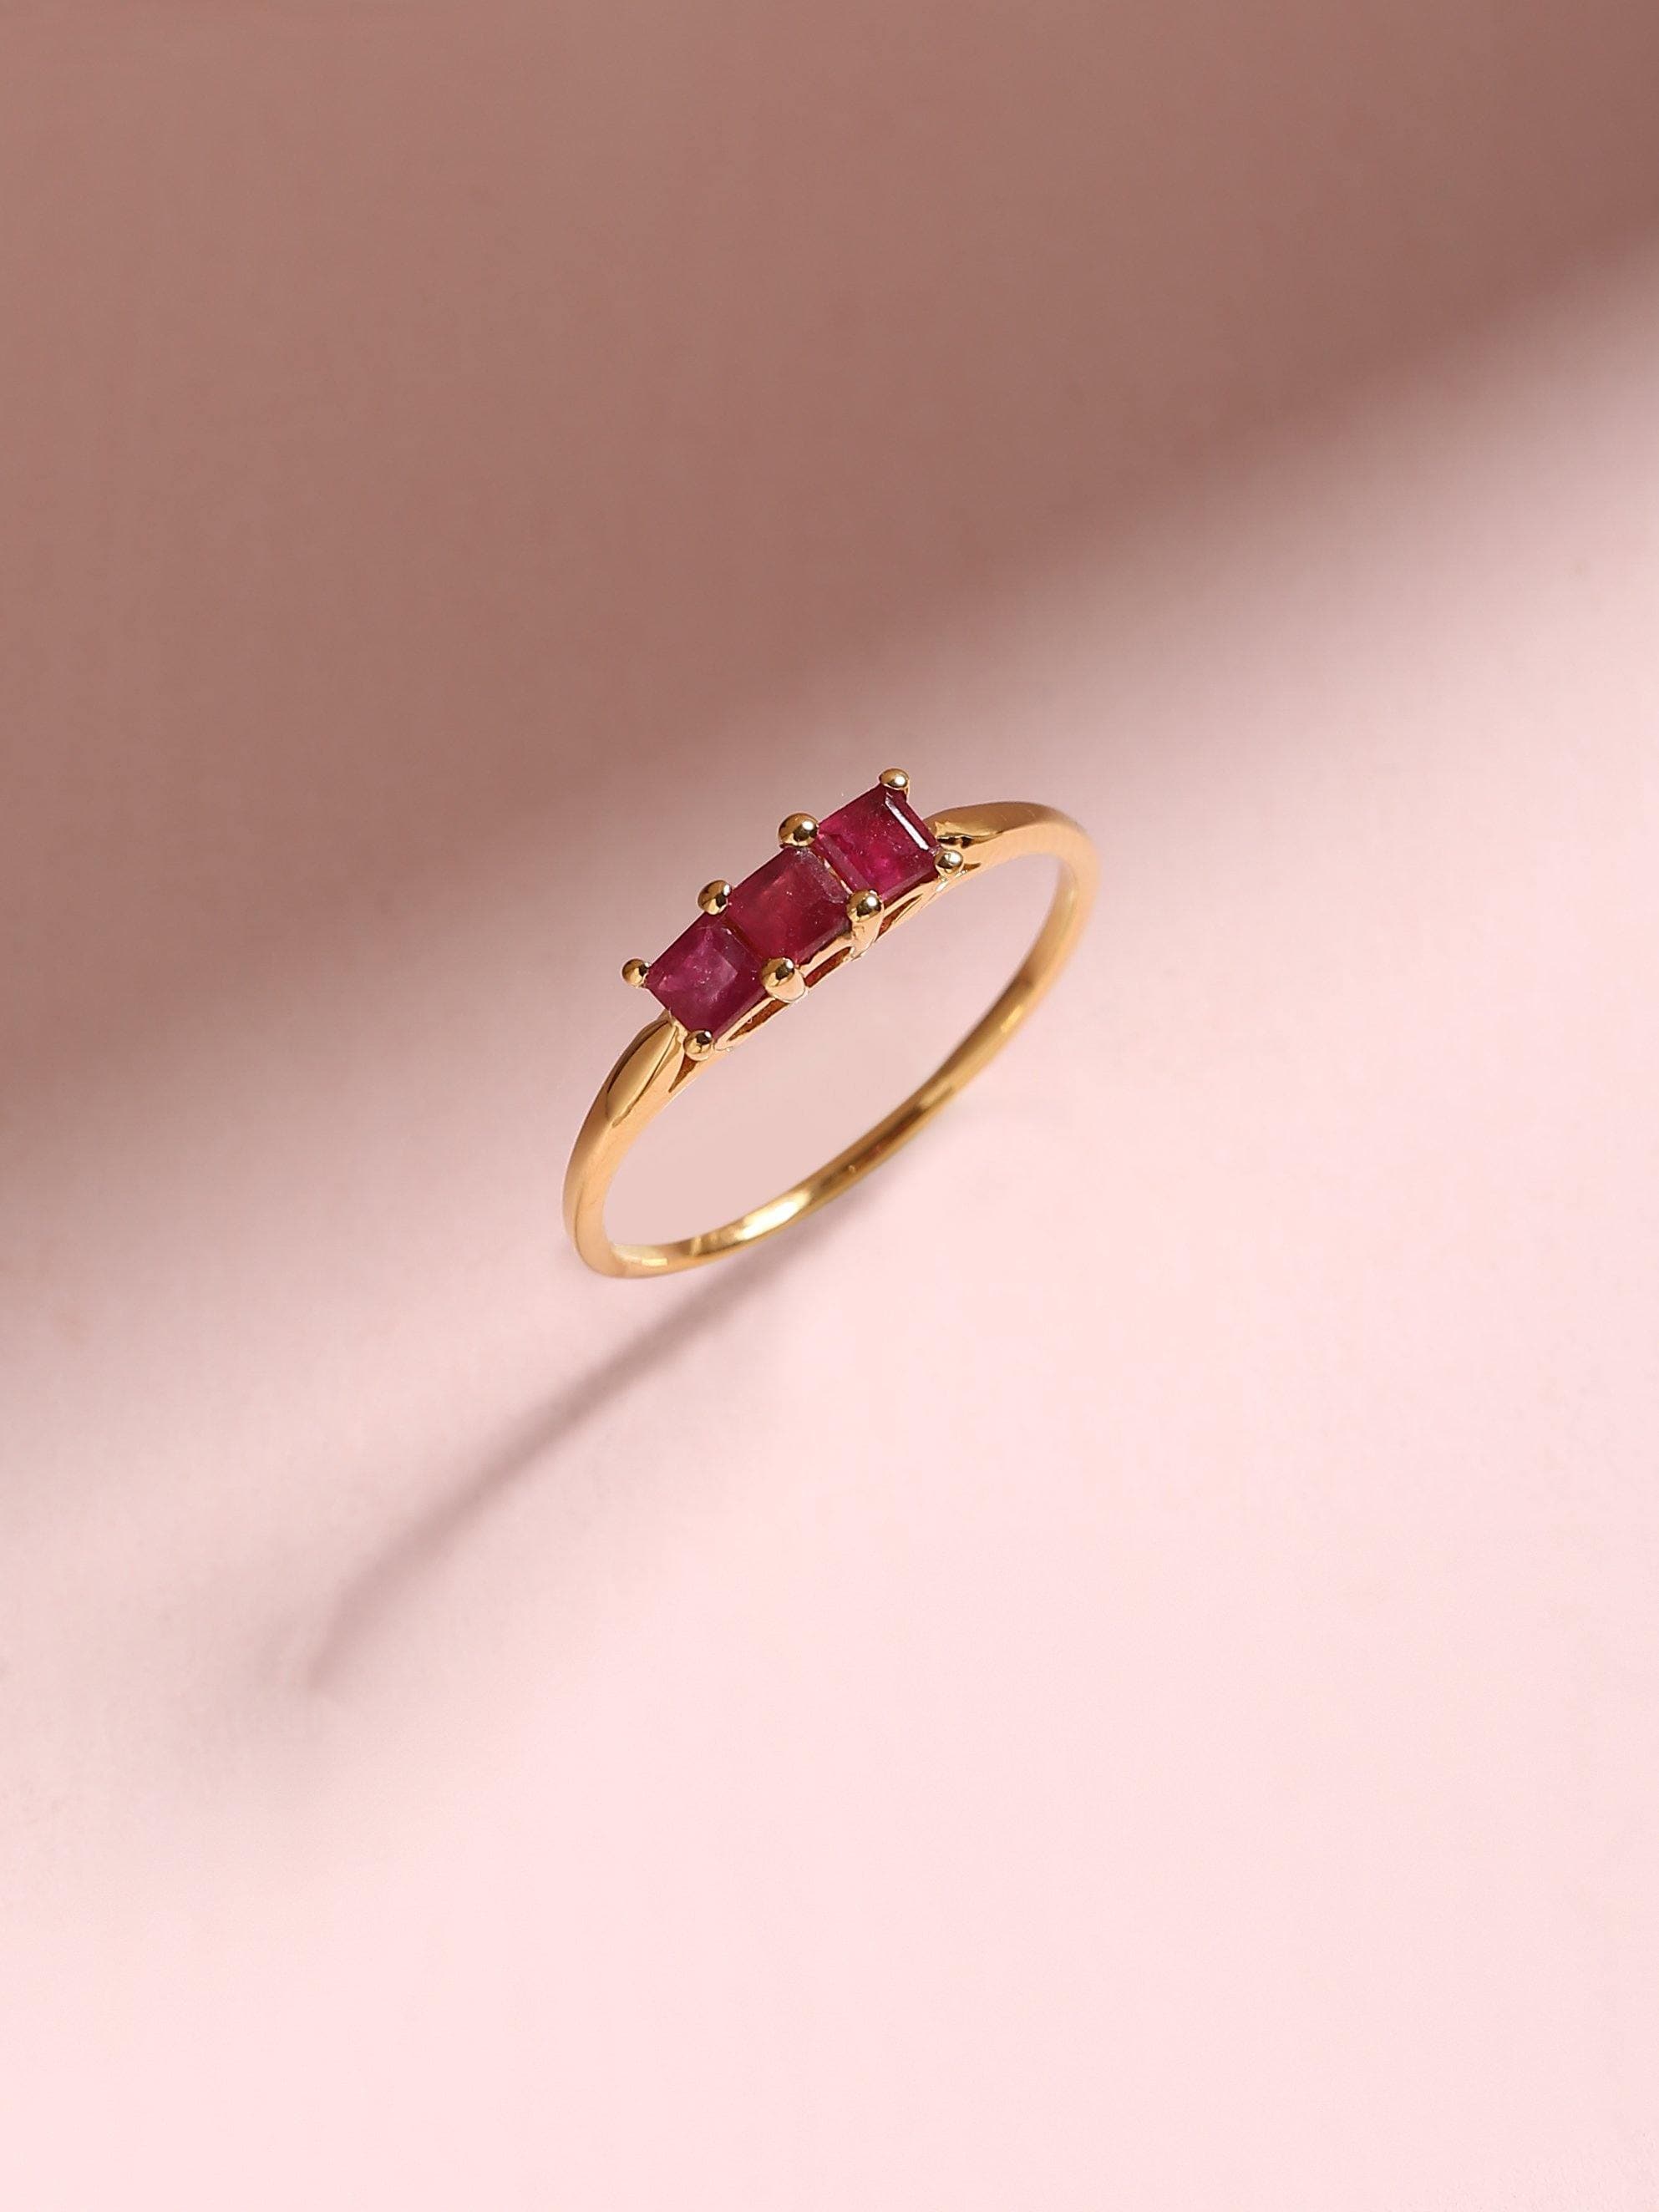 0.66 Ct. Glass Filled Ruby Solid 10k Yellow Gold Band Ring Jewelry - YoTreasure